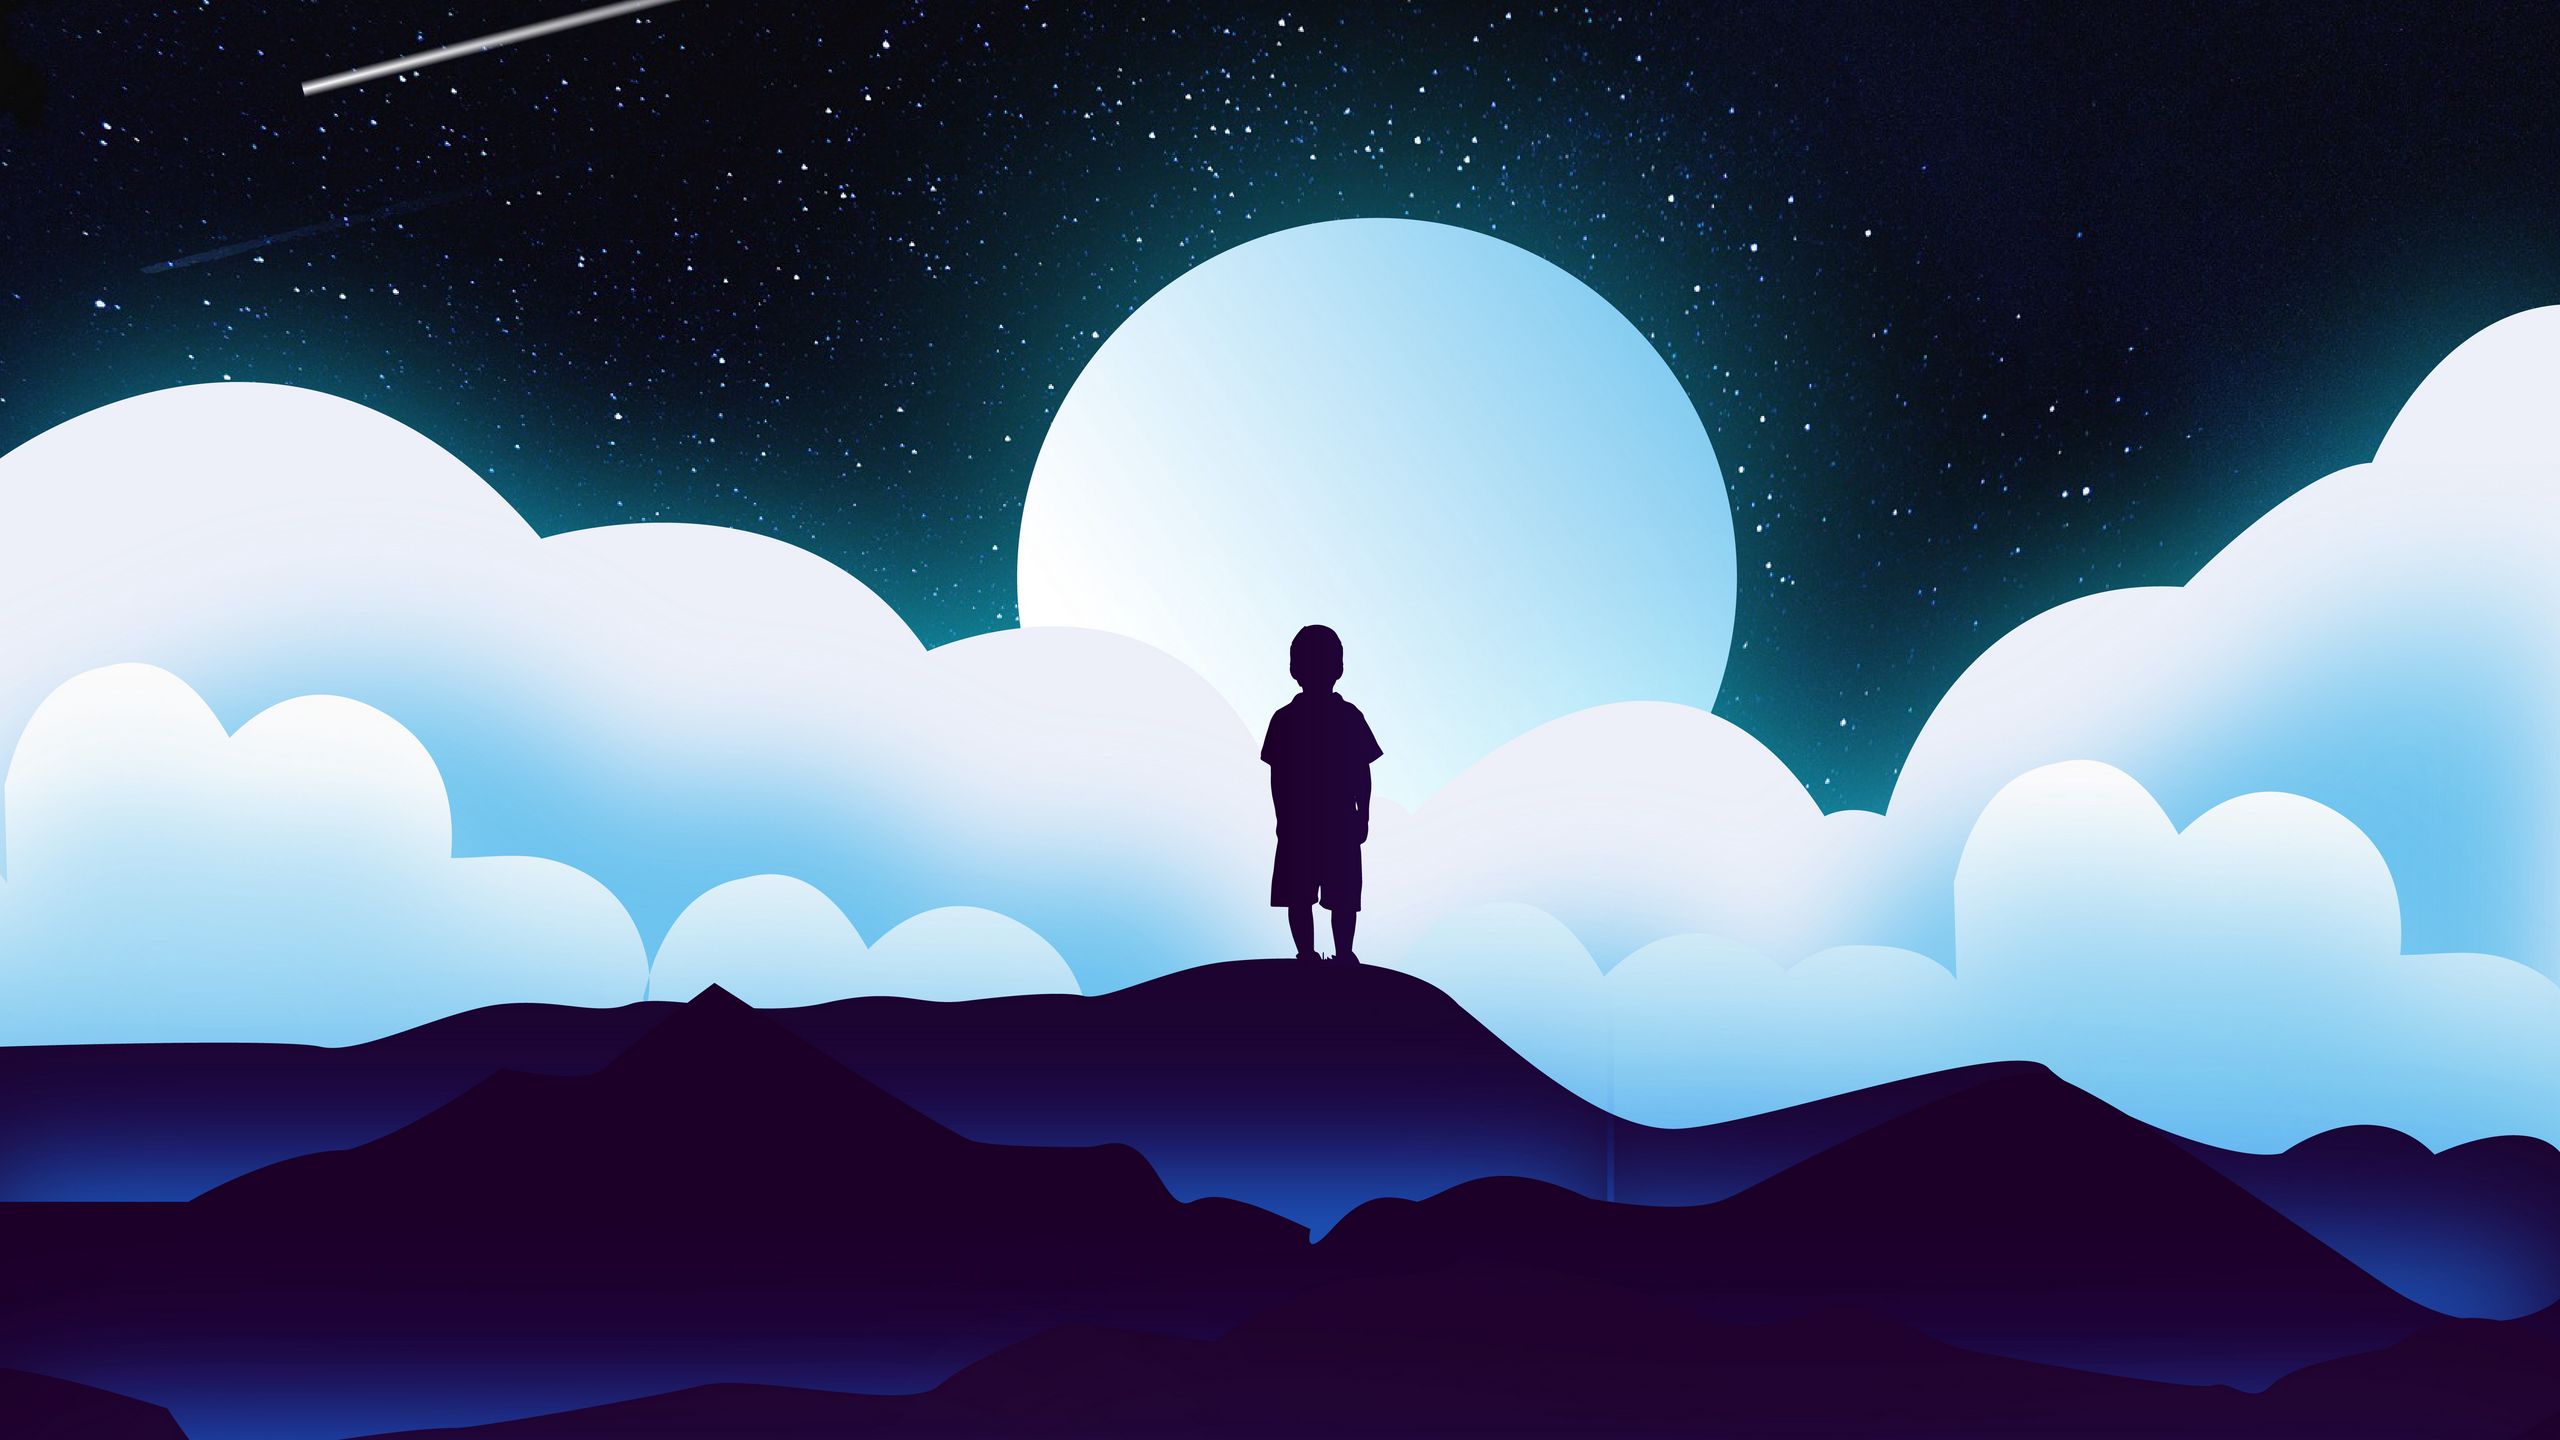 Download wallpaper 2560x1440 child, silhouette, space, clouds, moon, vector widescreen 16:9 HD background